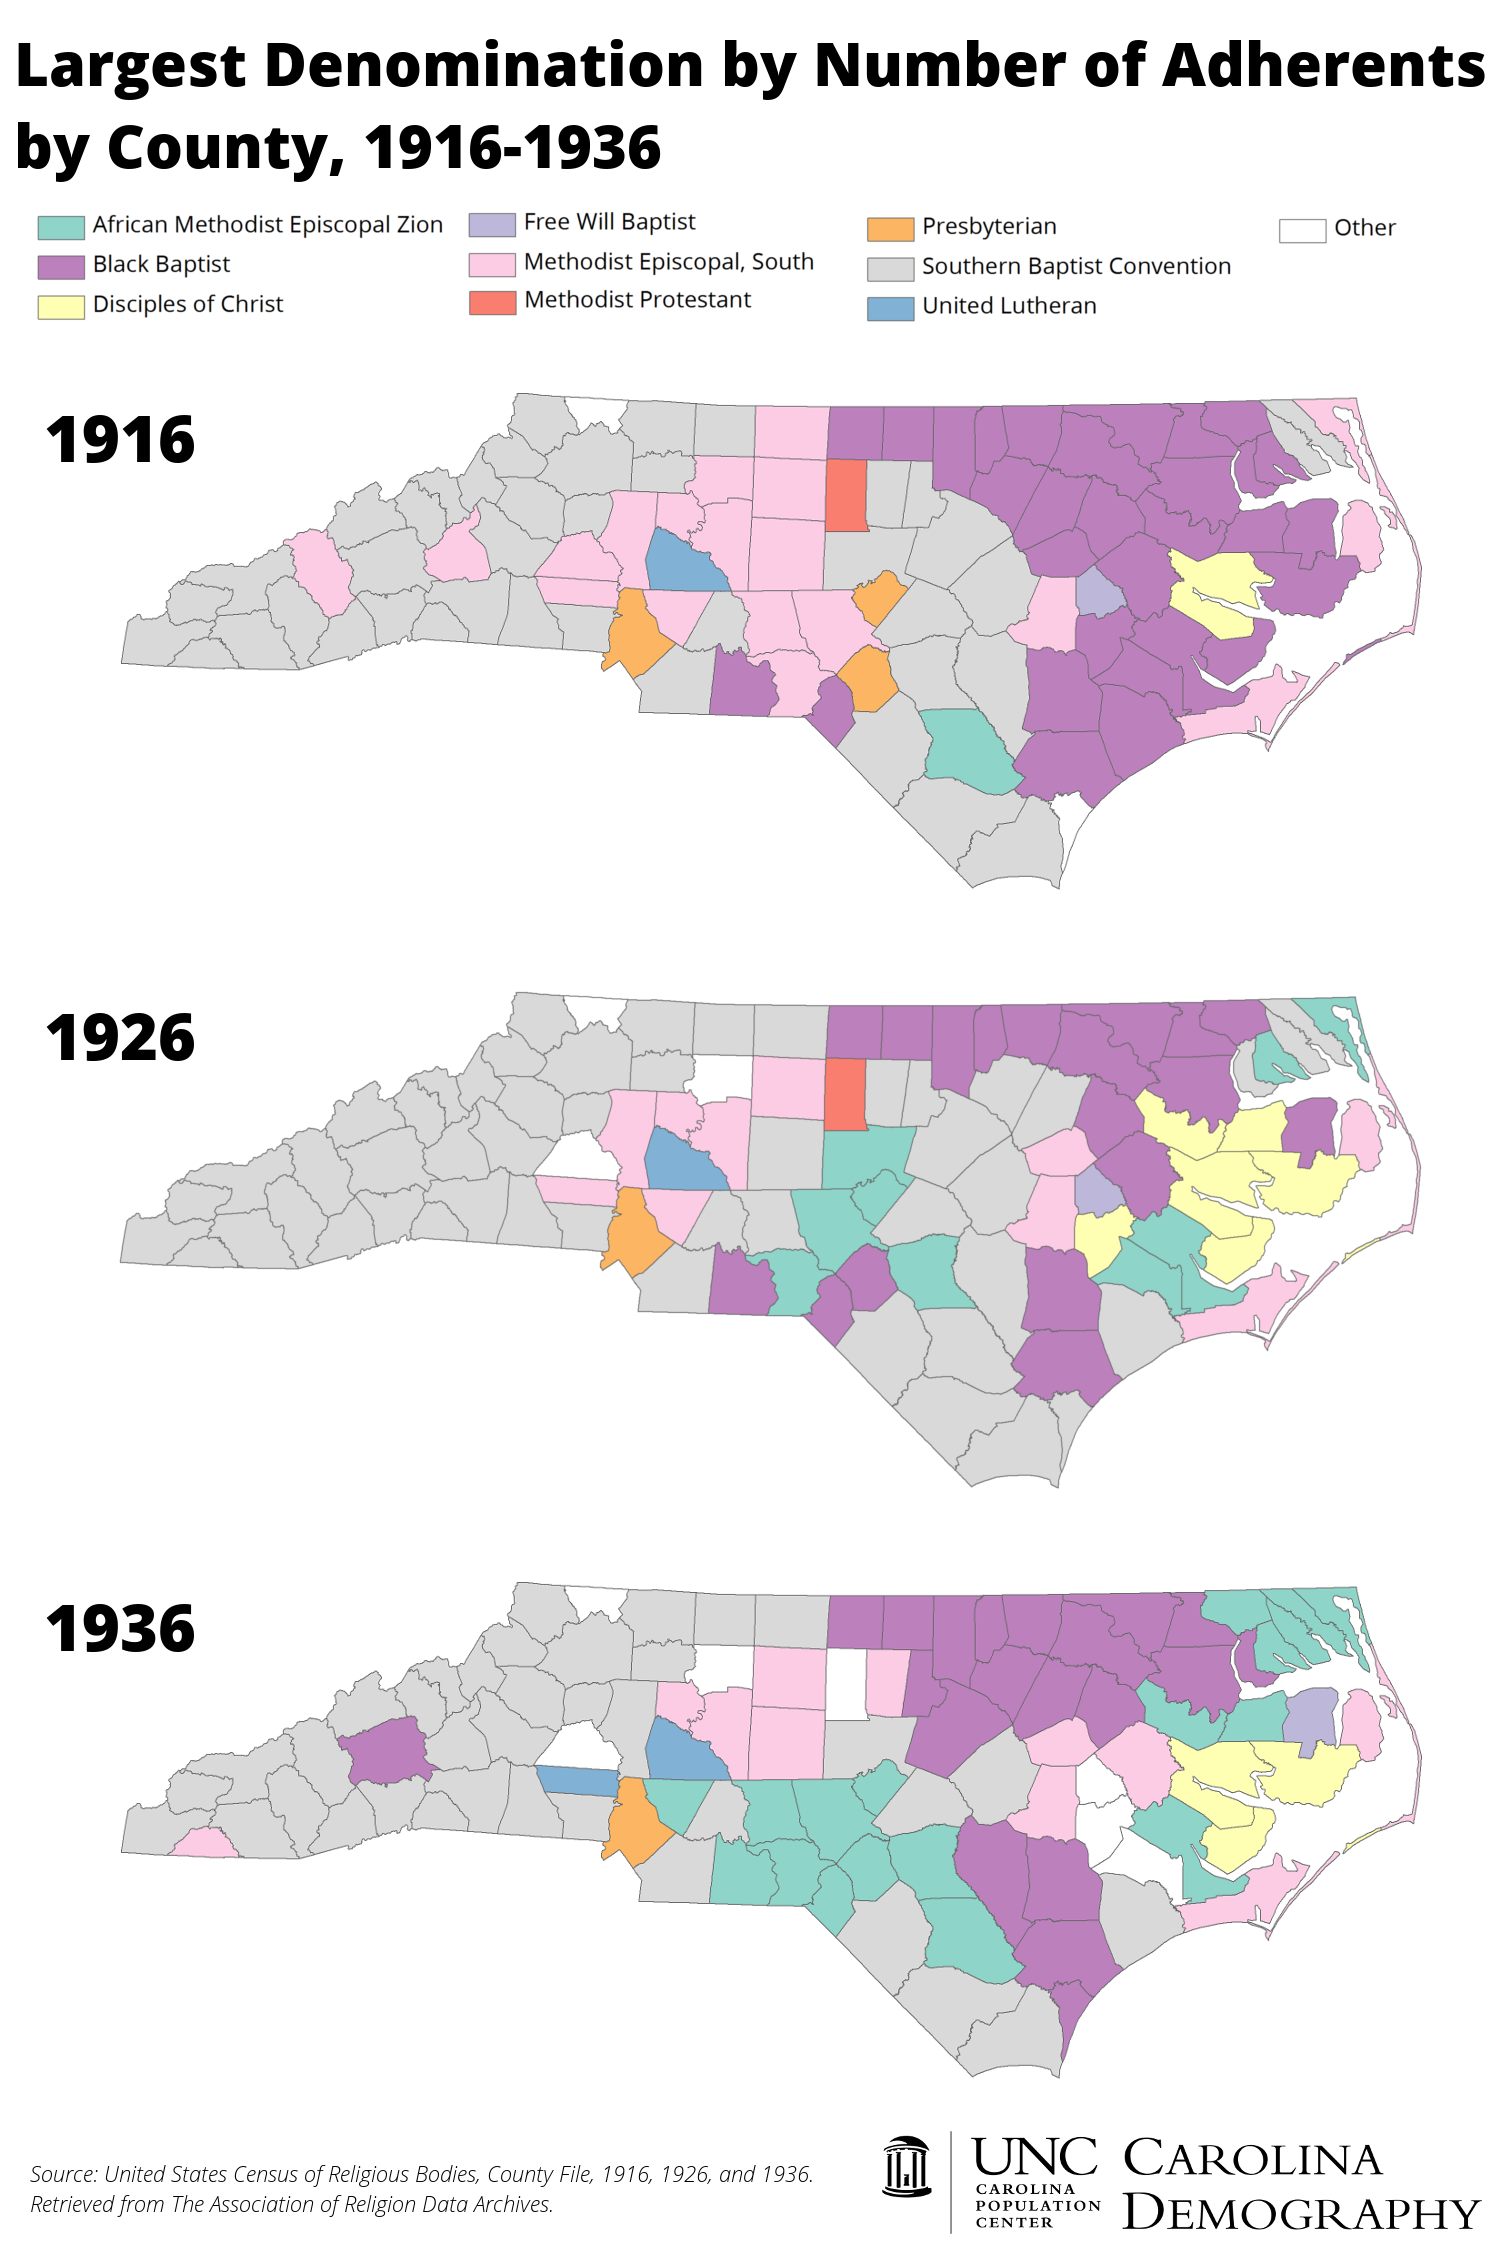 NC_Religious_Adherents_CD_1916to1936